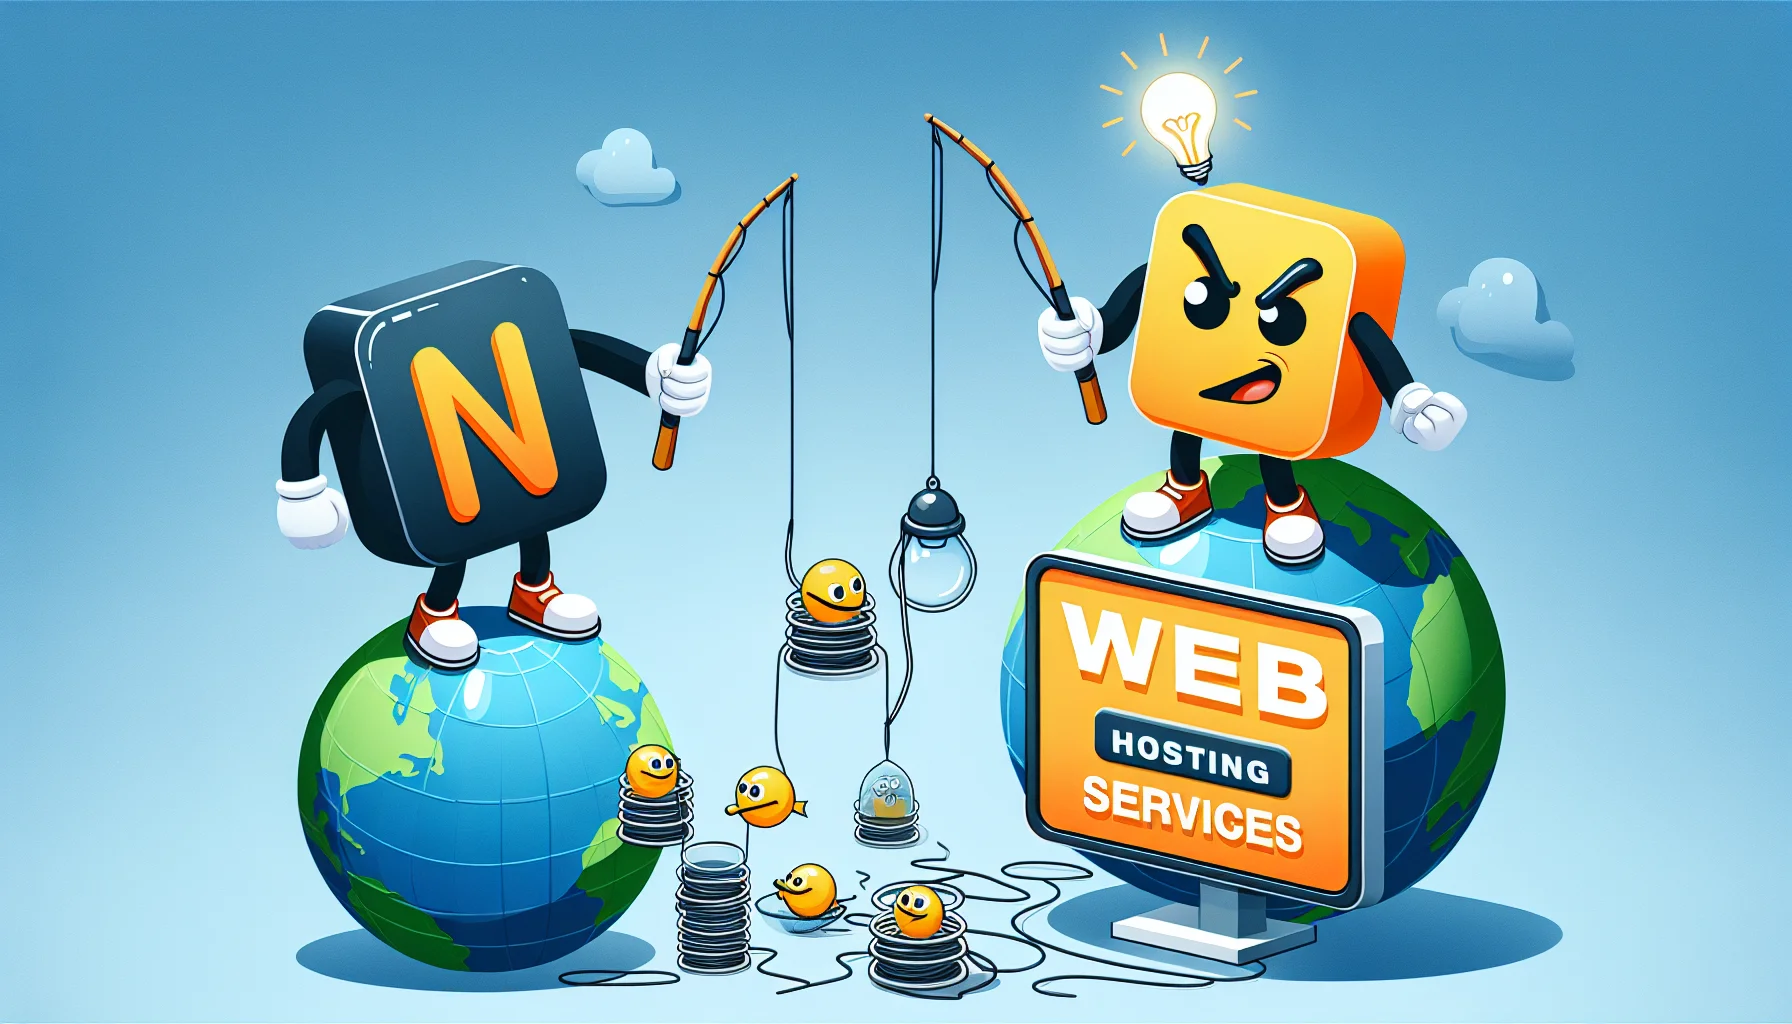 Depict a humorous scenario involving two anthropomorphized domain registration logos, one with the acronym 'N' and the other with 'NS'. They're in a friendly competition, trying to reel in website icons with fishing rods, standing on top of a large globe. This aims to express the enticing appeal of their web hosting services. Add a lightbulb above each logo's head, symbolizing great web hosting ideas, and install a digital billboard in the background displaying 'Web Hosting Services' in bold text.